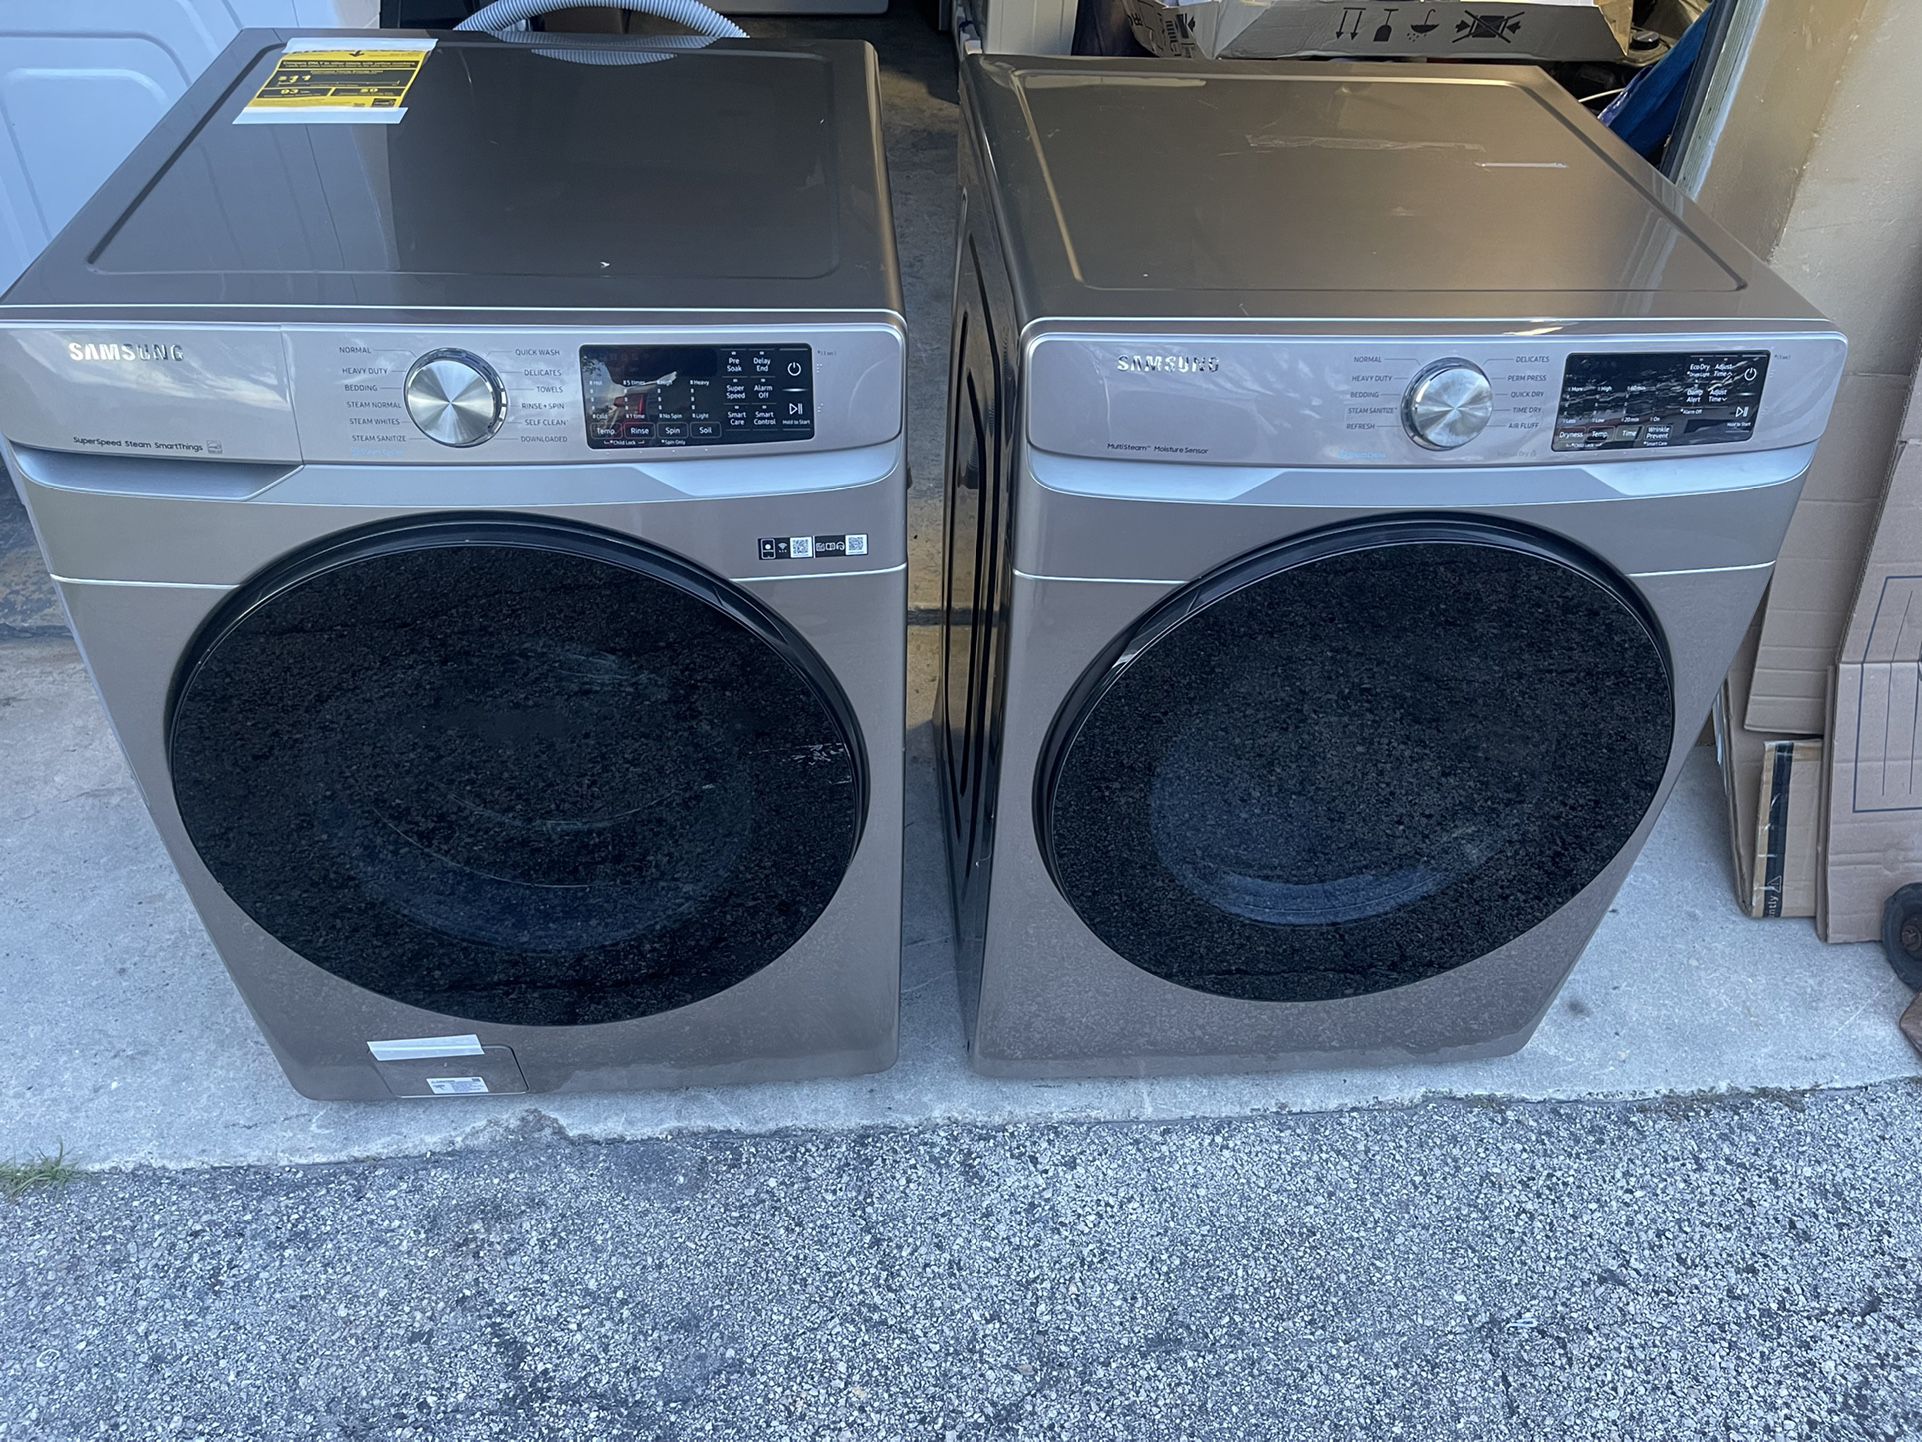 New Open Box Samsung Washer And Dryer 27” Front Loaders Scratch and Dents 100 Days Warranty 